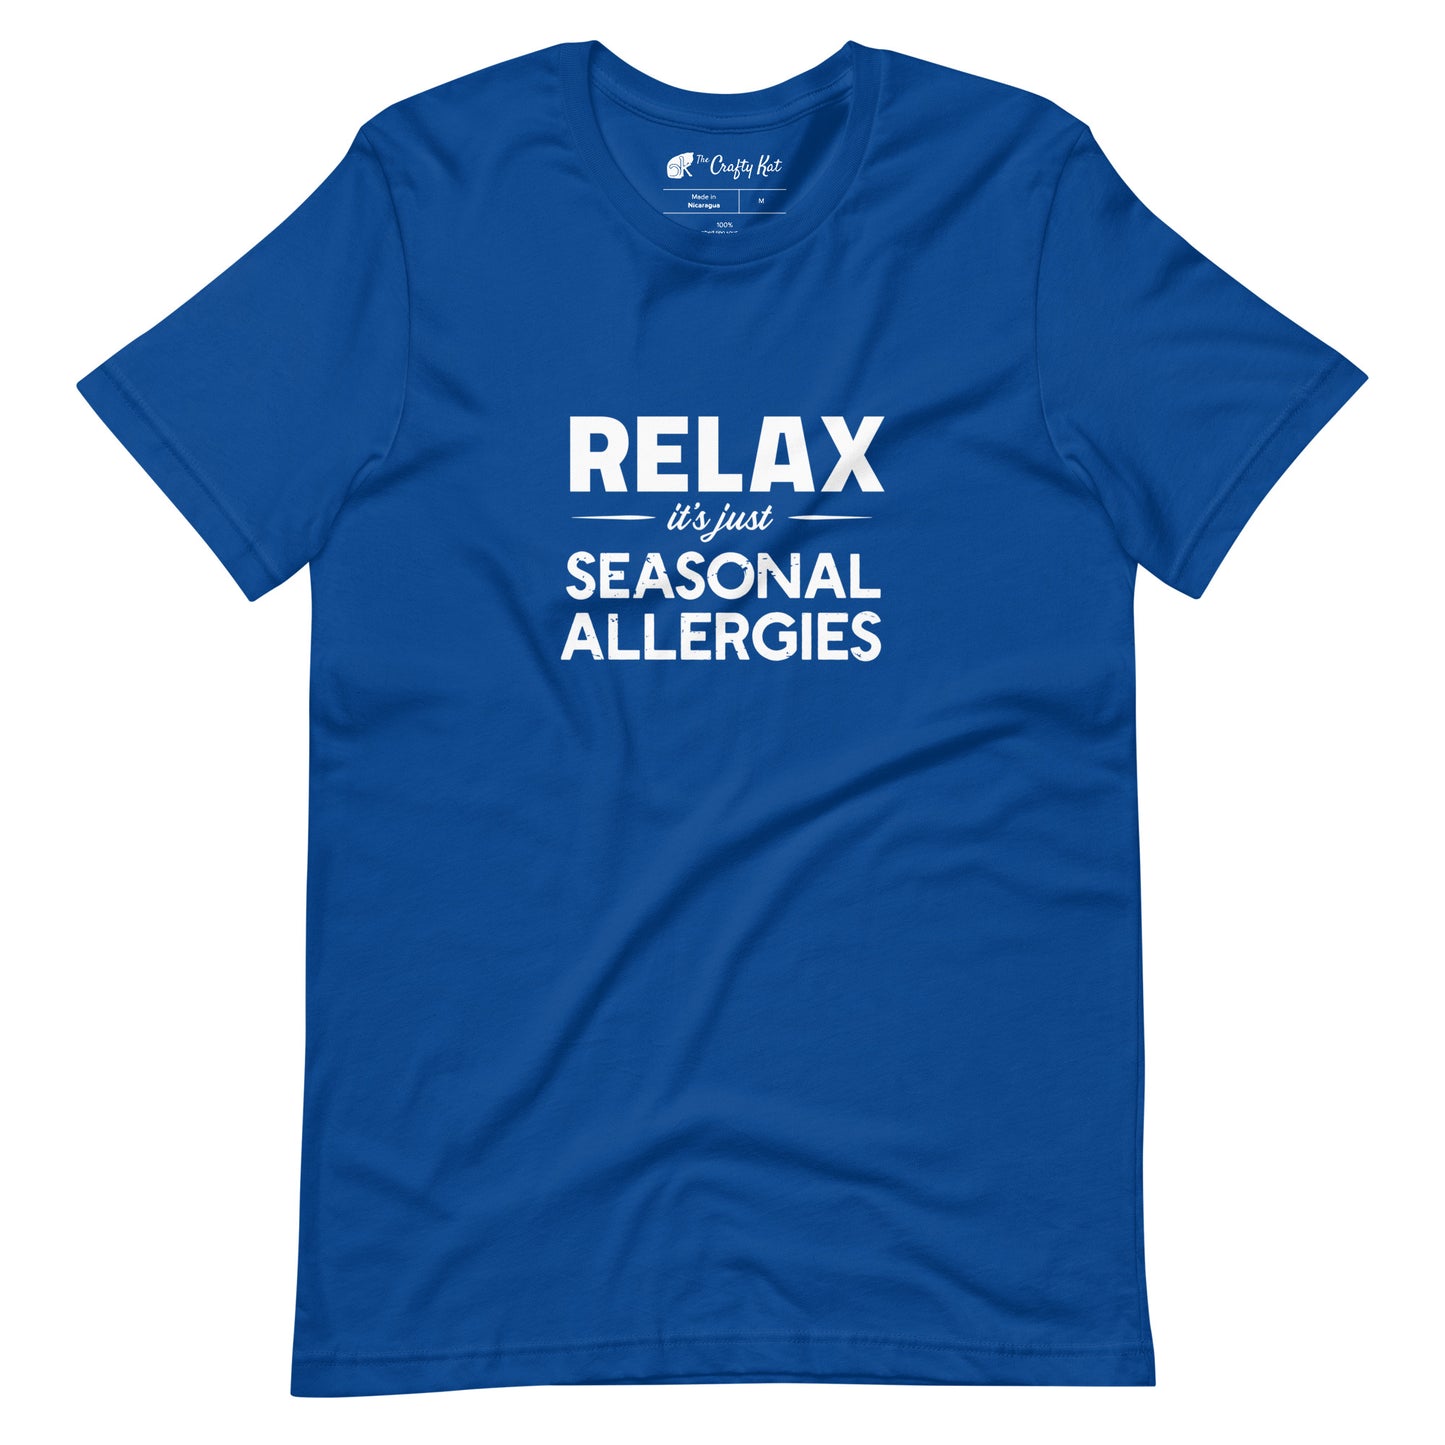 True Royal blue t-shirt with white graphic: "RELAX it's just SEASONAL ALLERGIES"